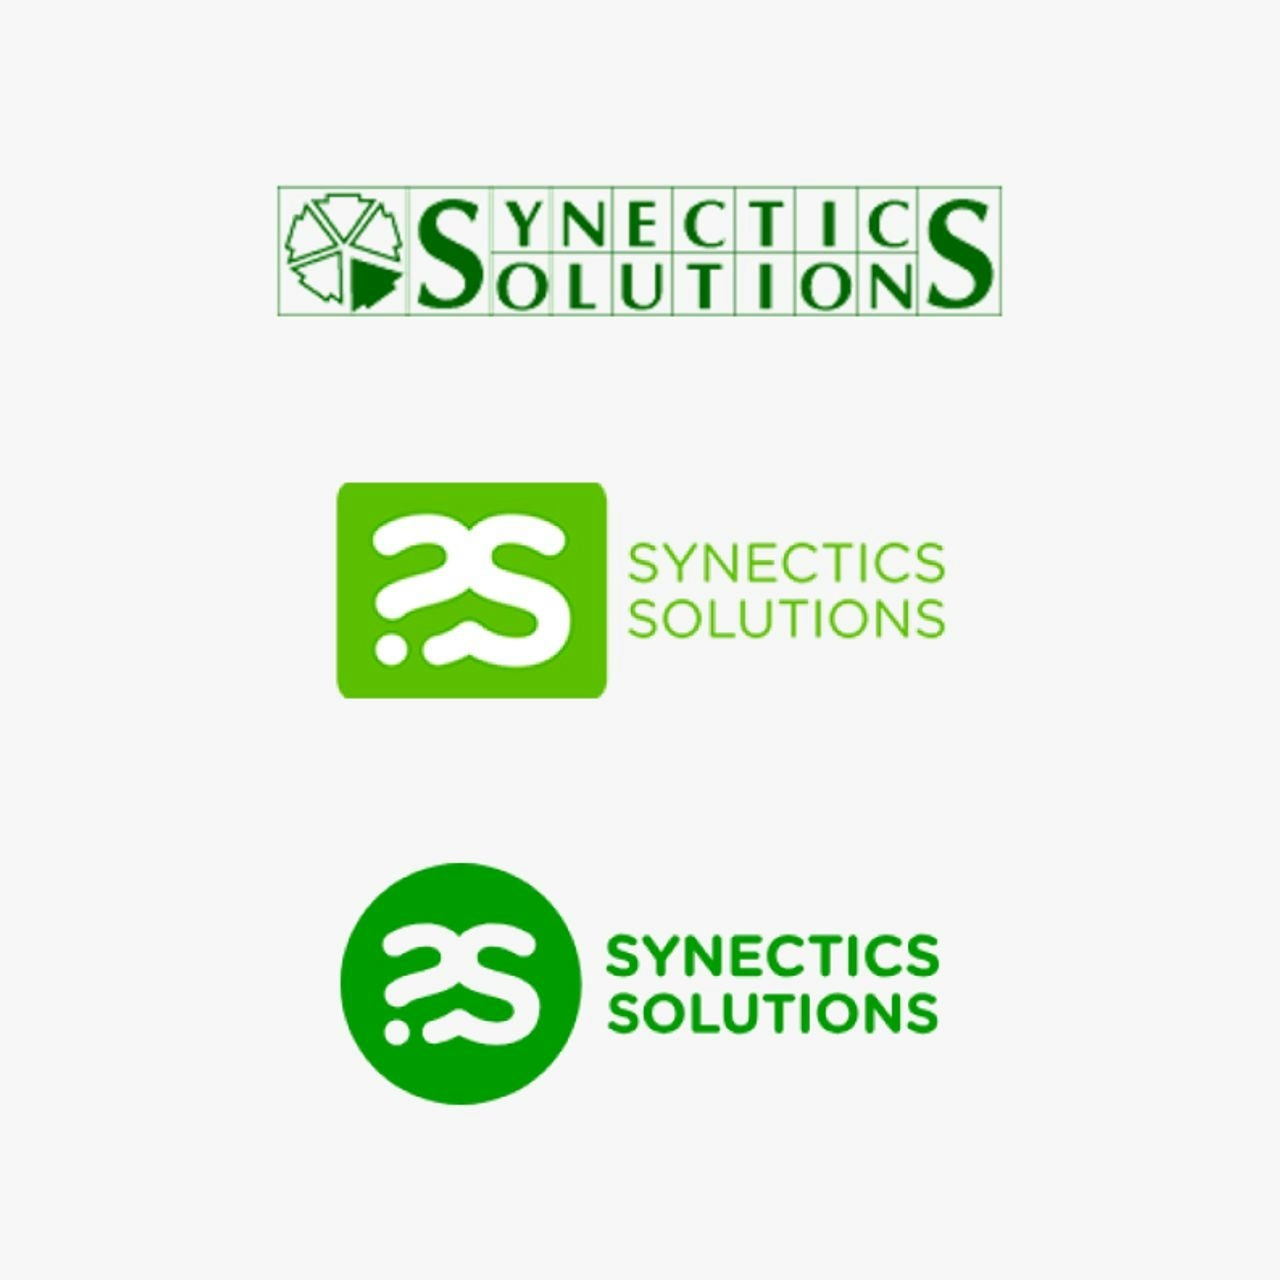 Three variations of the Synectics Solutions logo in green, displaying a progression from a detailed emblem with text to a simplified icon with the company name beneath it.